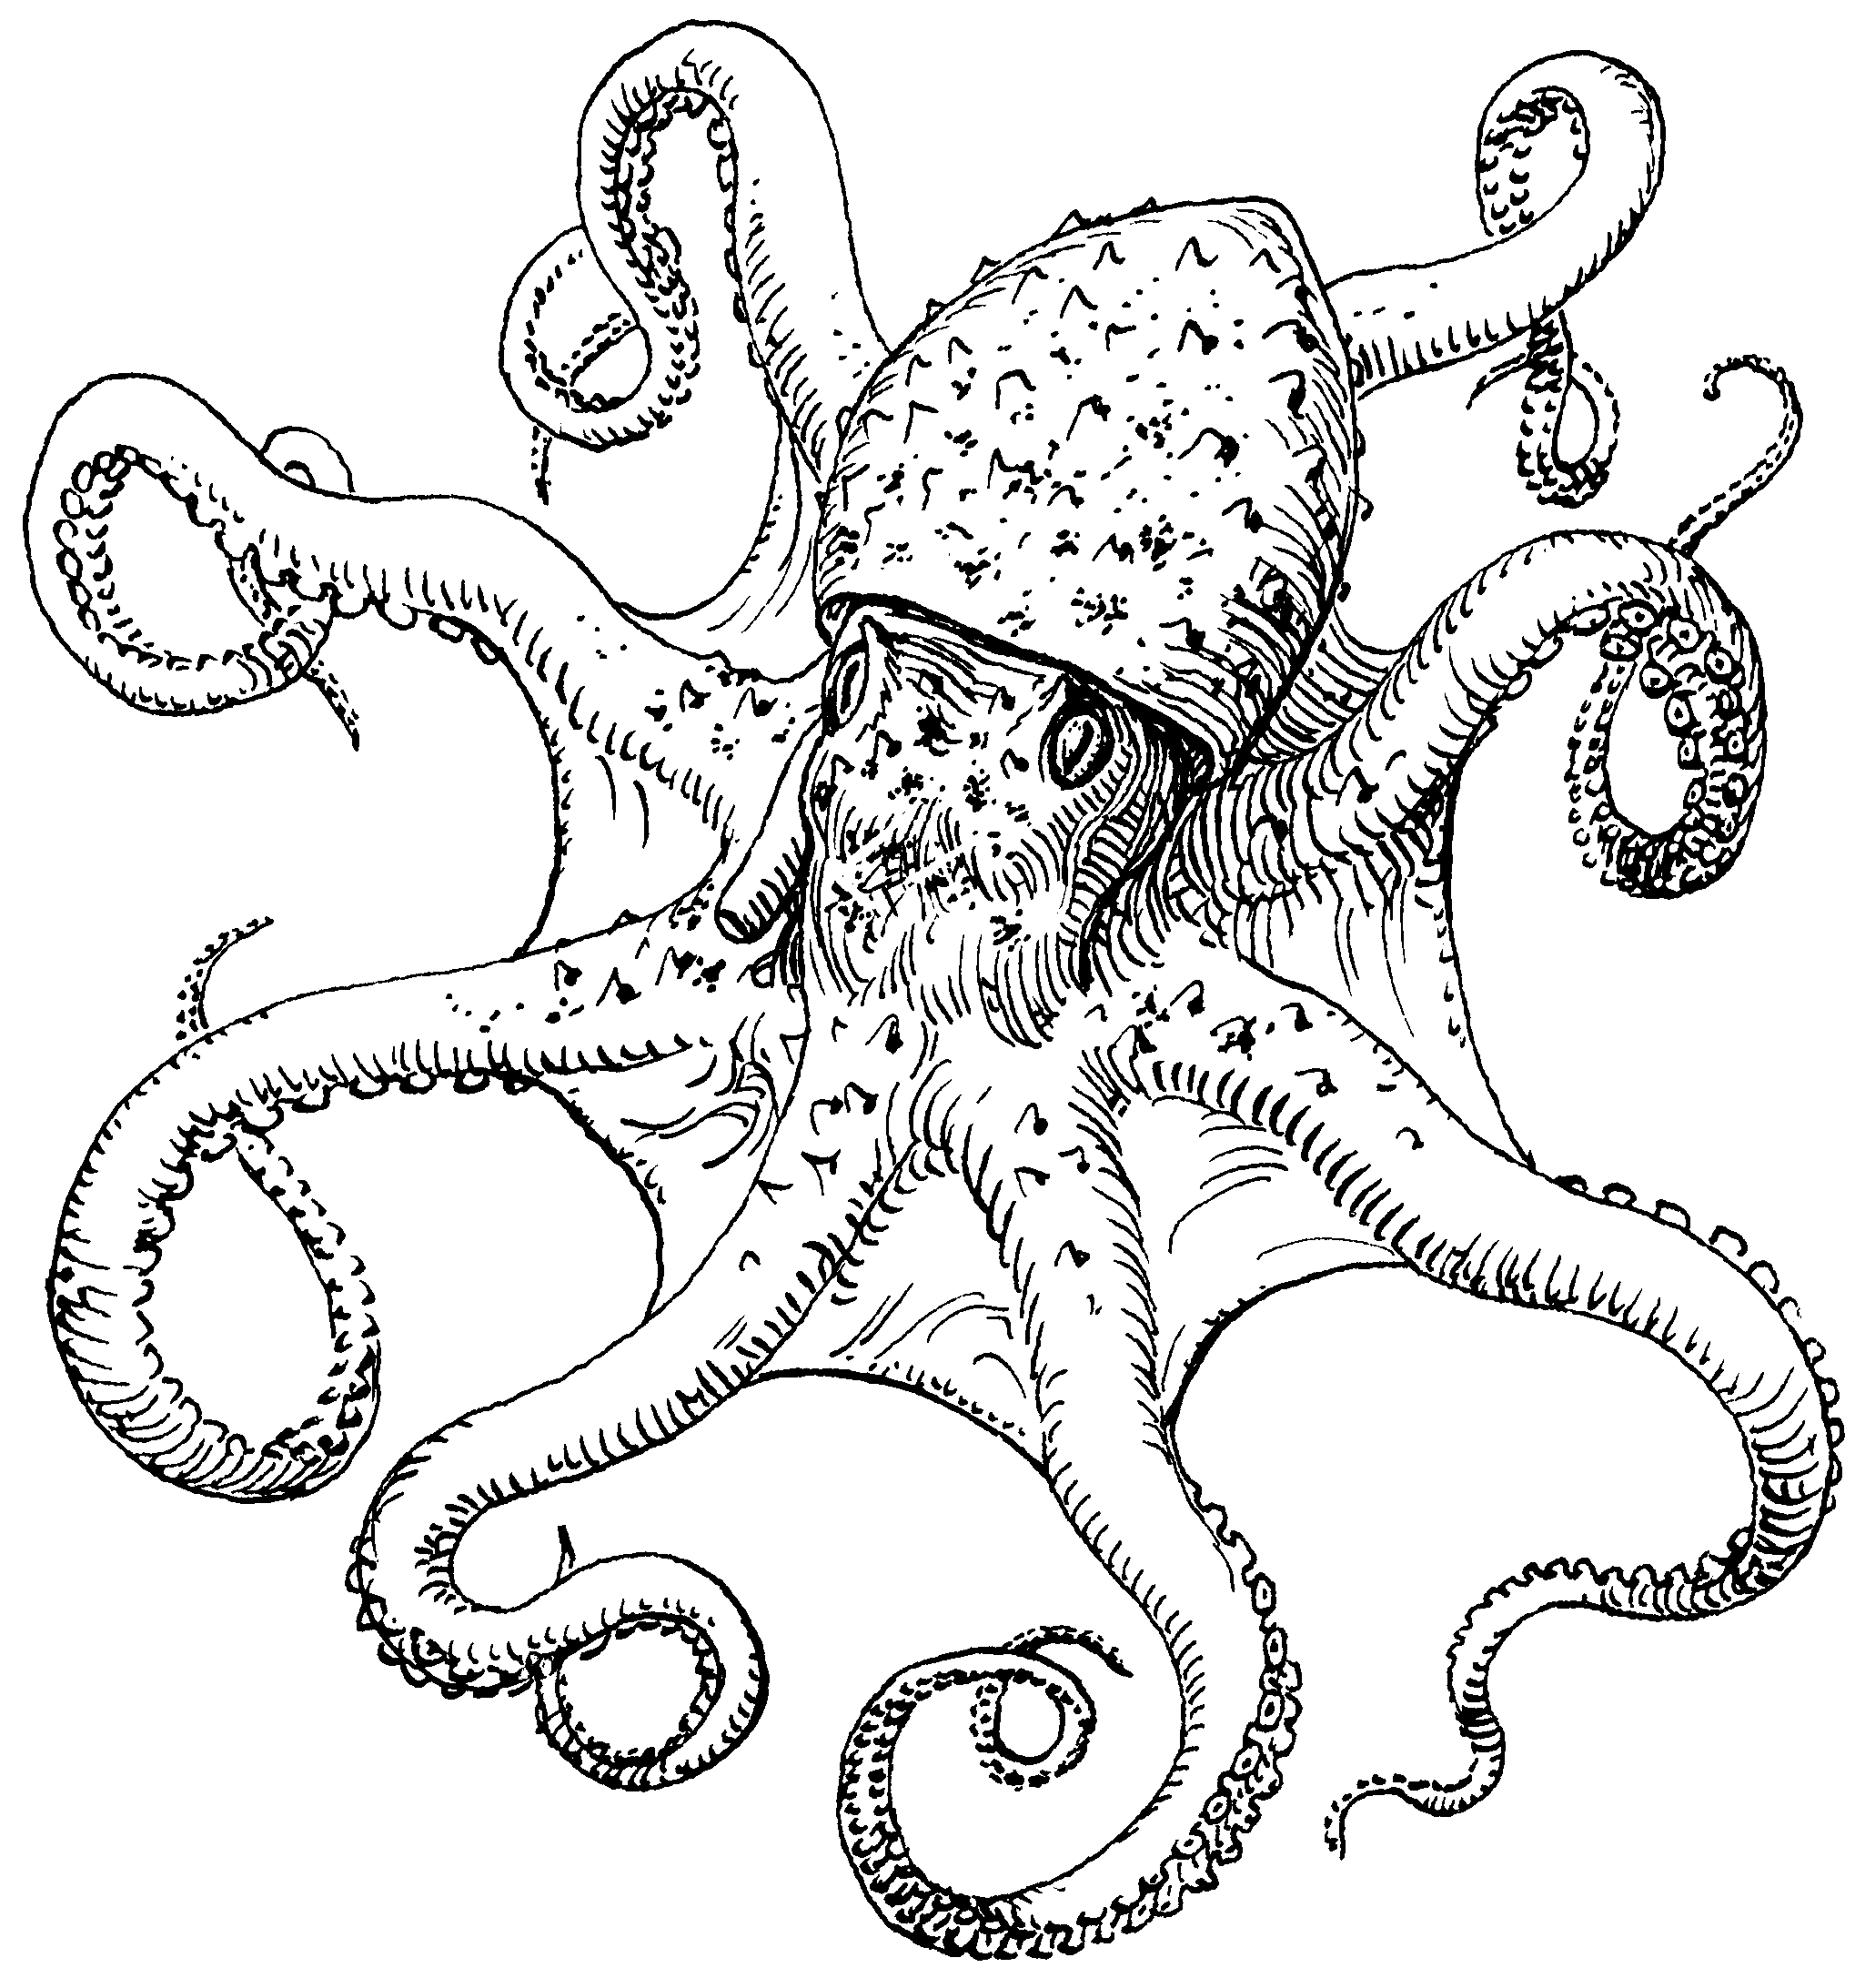 Lovely uncolored octopus tattoo design